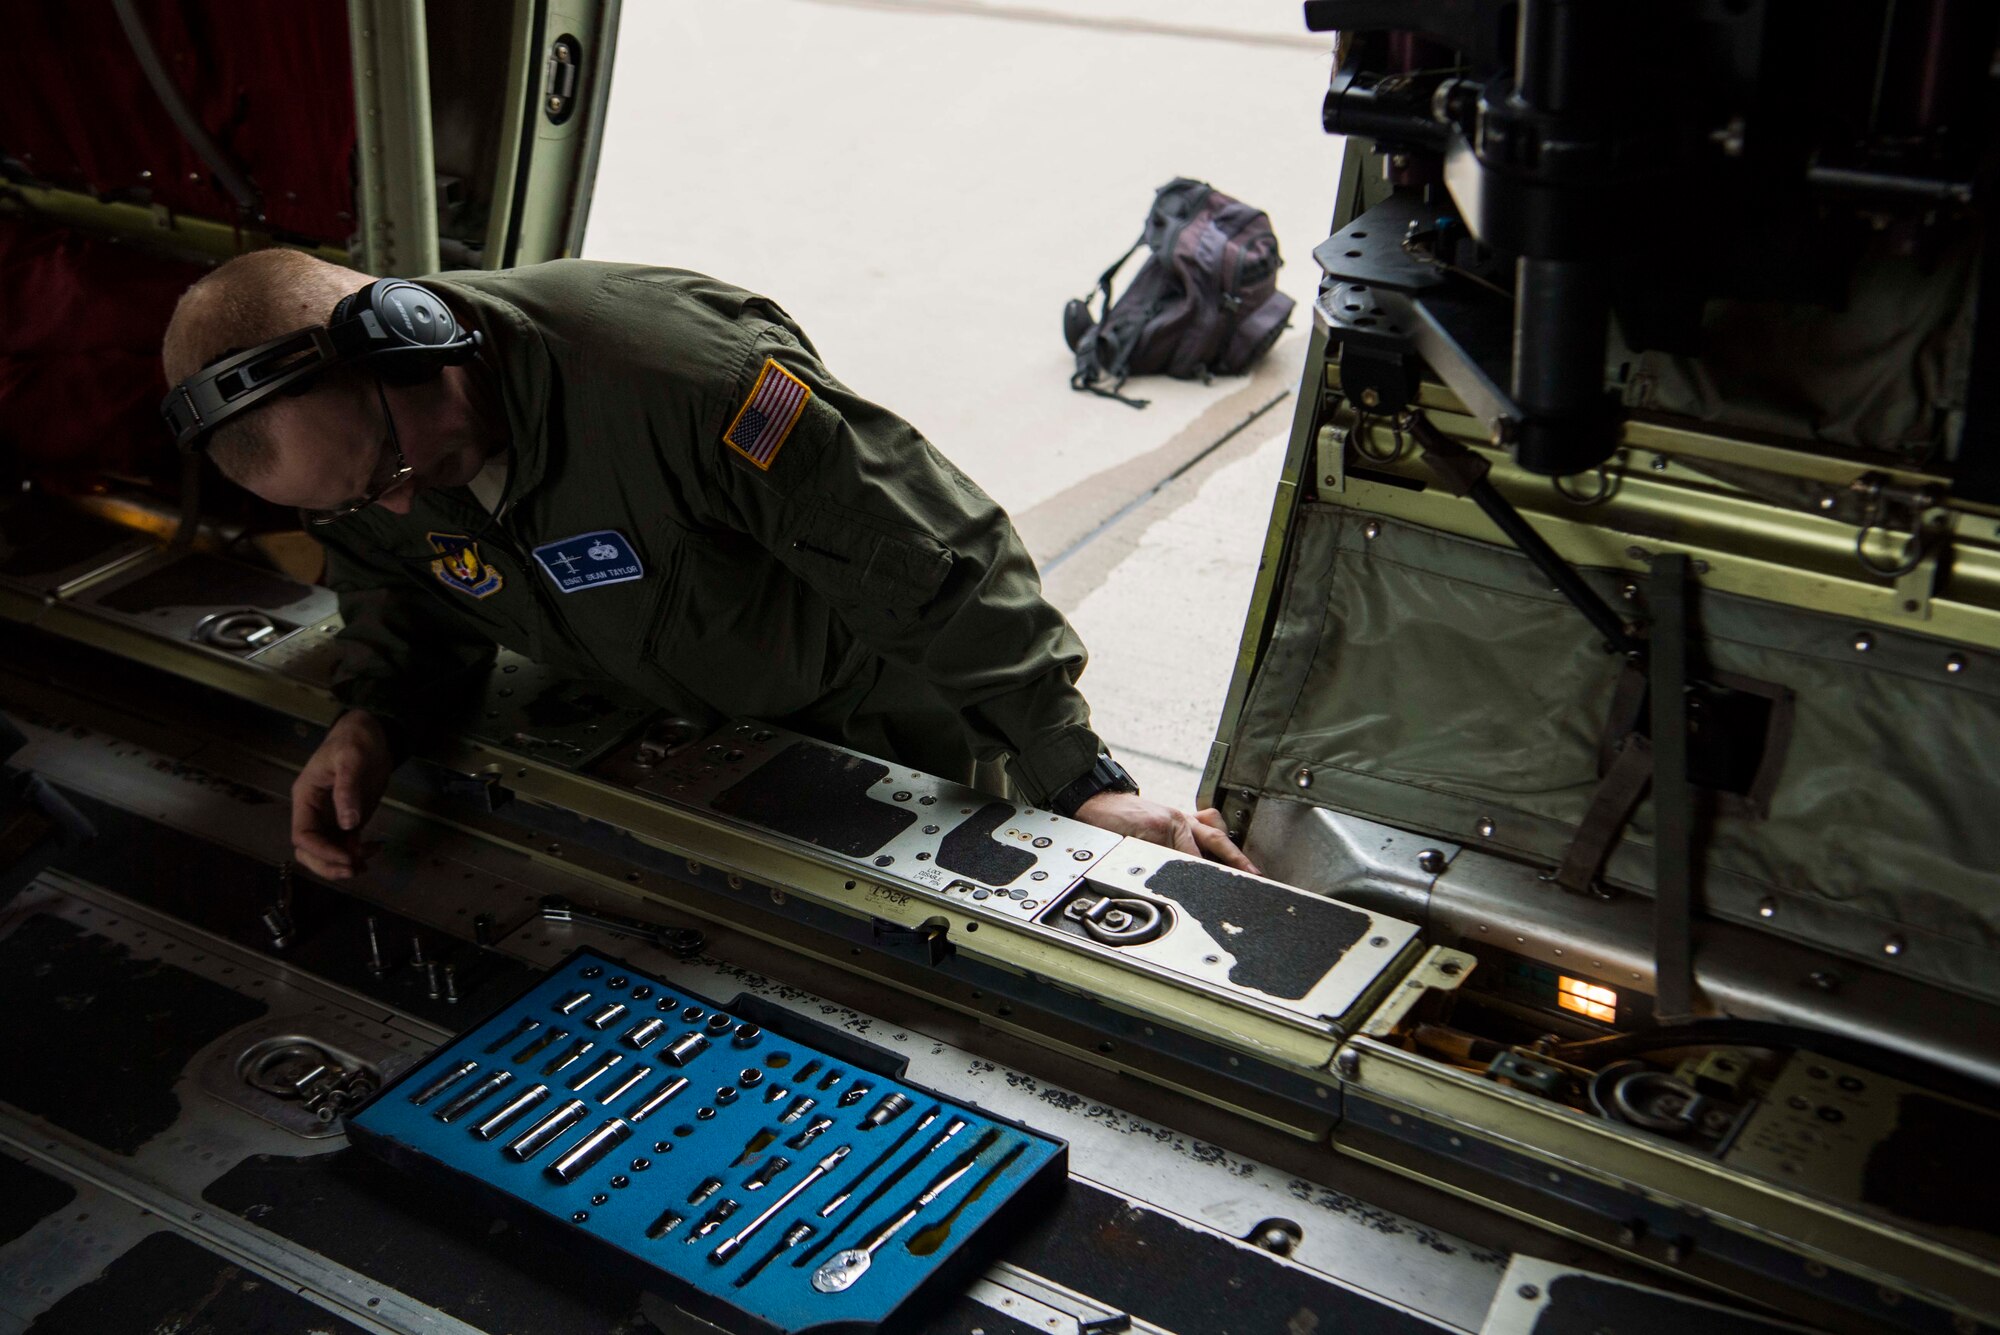 U.S. Air Force Staff Sgt. Sean Taylor, 86th Aircraft Maintenance Squadron flying crew chief works on a C-130J Super Hercules aircraft on Ramstein Air Base, Germany Oct. 31, 2018. Flying crew chiefs ensure the aircraft is taken care of during missions that take place away from home station. (U.S. Air Force photo by Senior Airman Devin M. Rumbaugh)